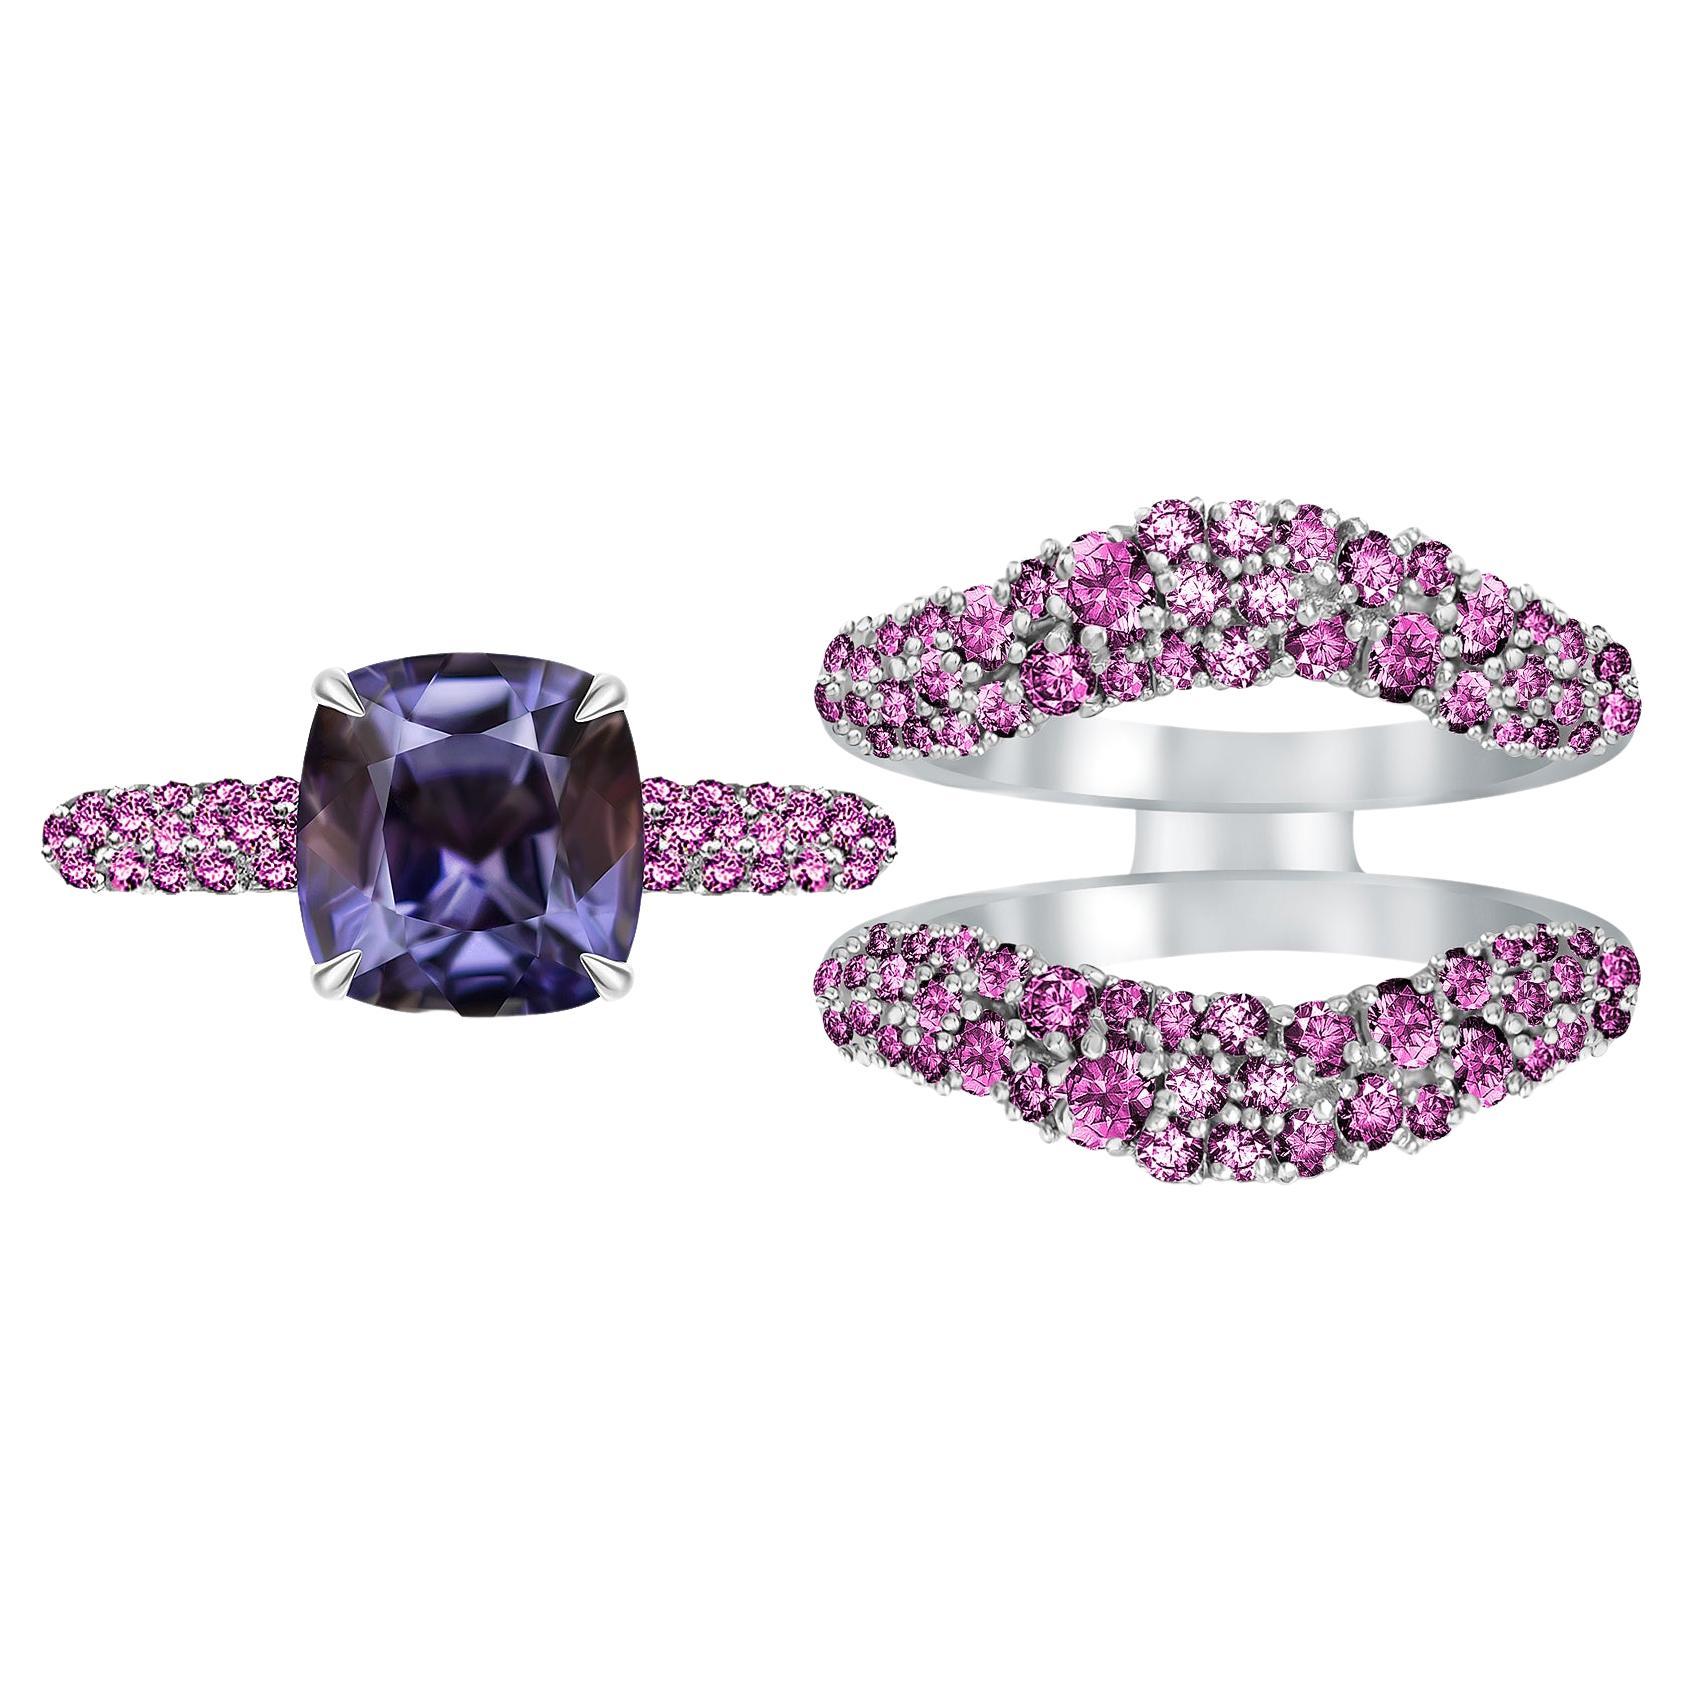 3.2 Carat Spinel Pink Sapphires 18 Karat White Gold Dual Rings "Embrace" by D&A For Sale